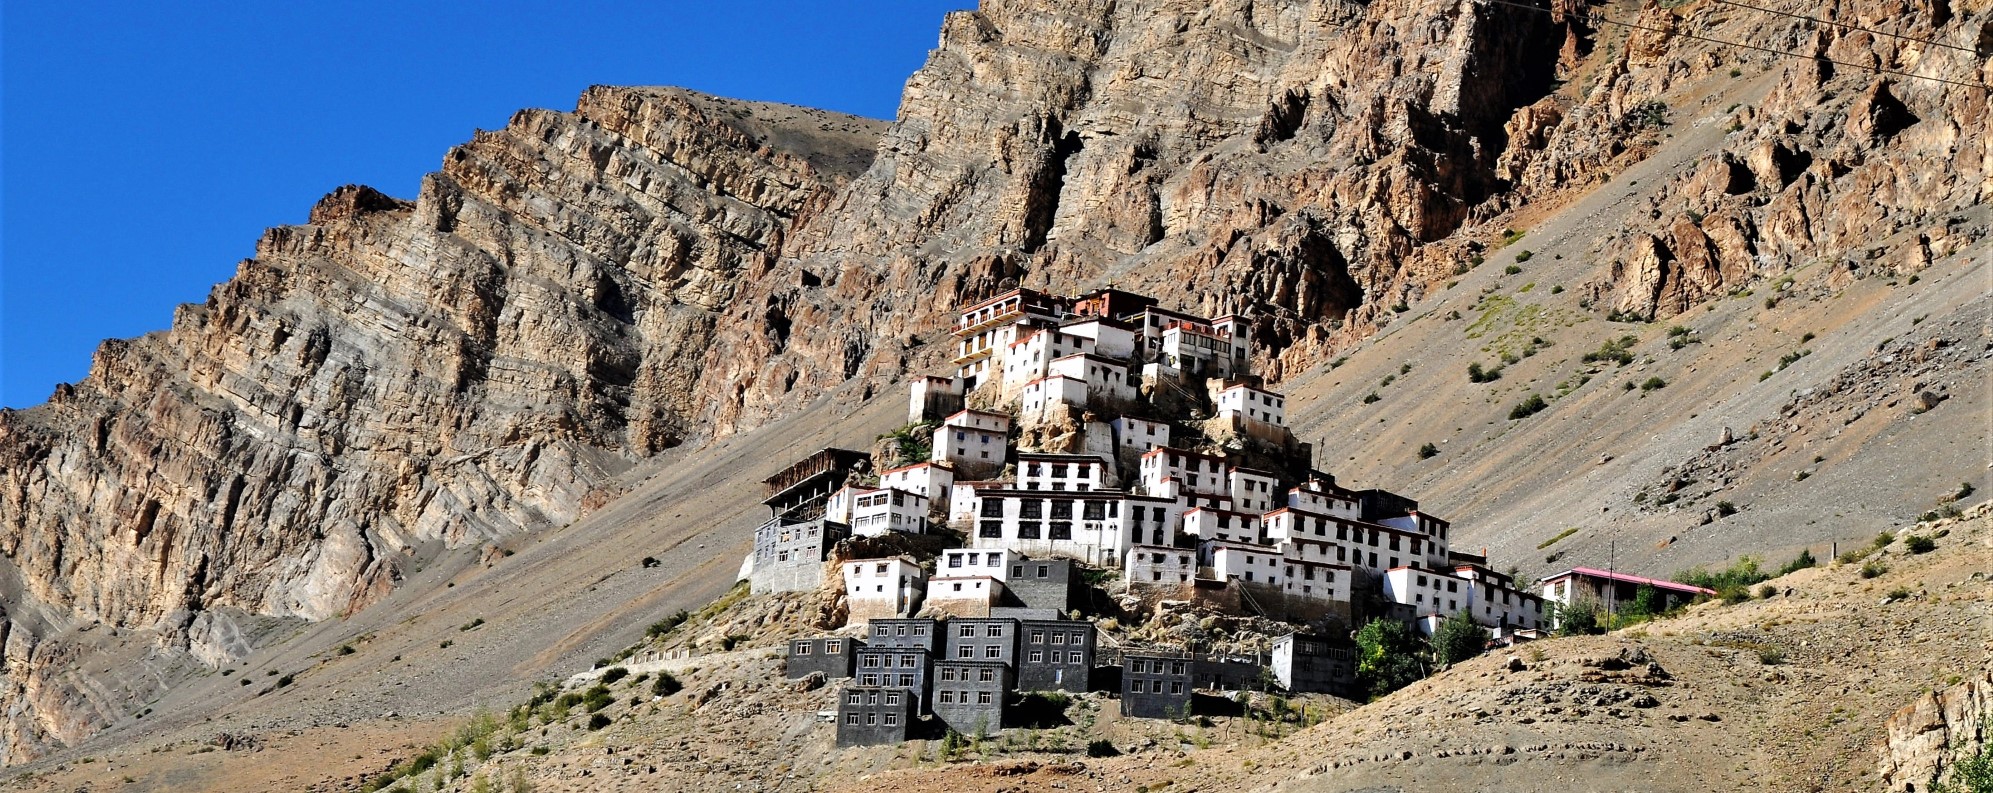 May is a good time to visit in Spiti Valley